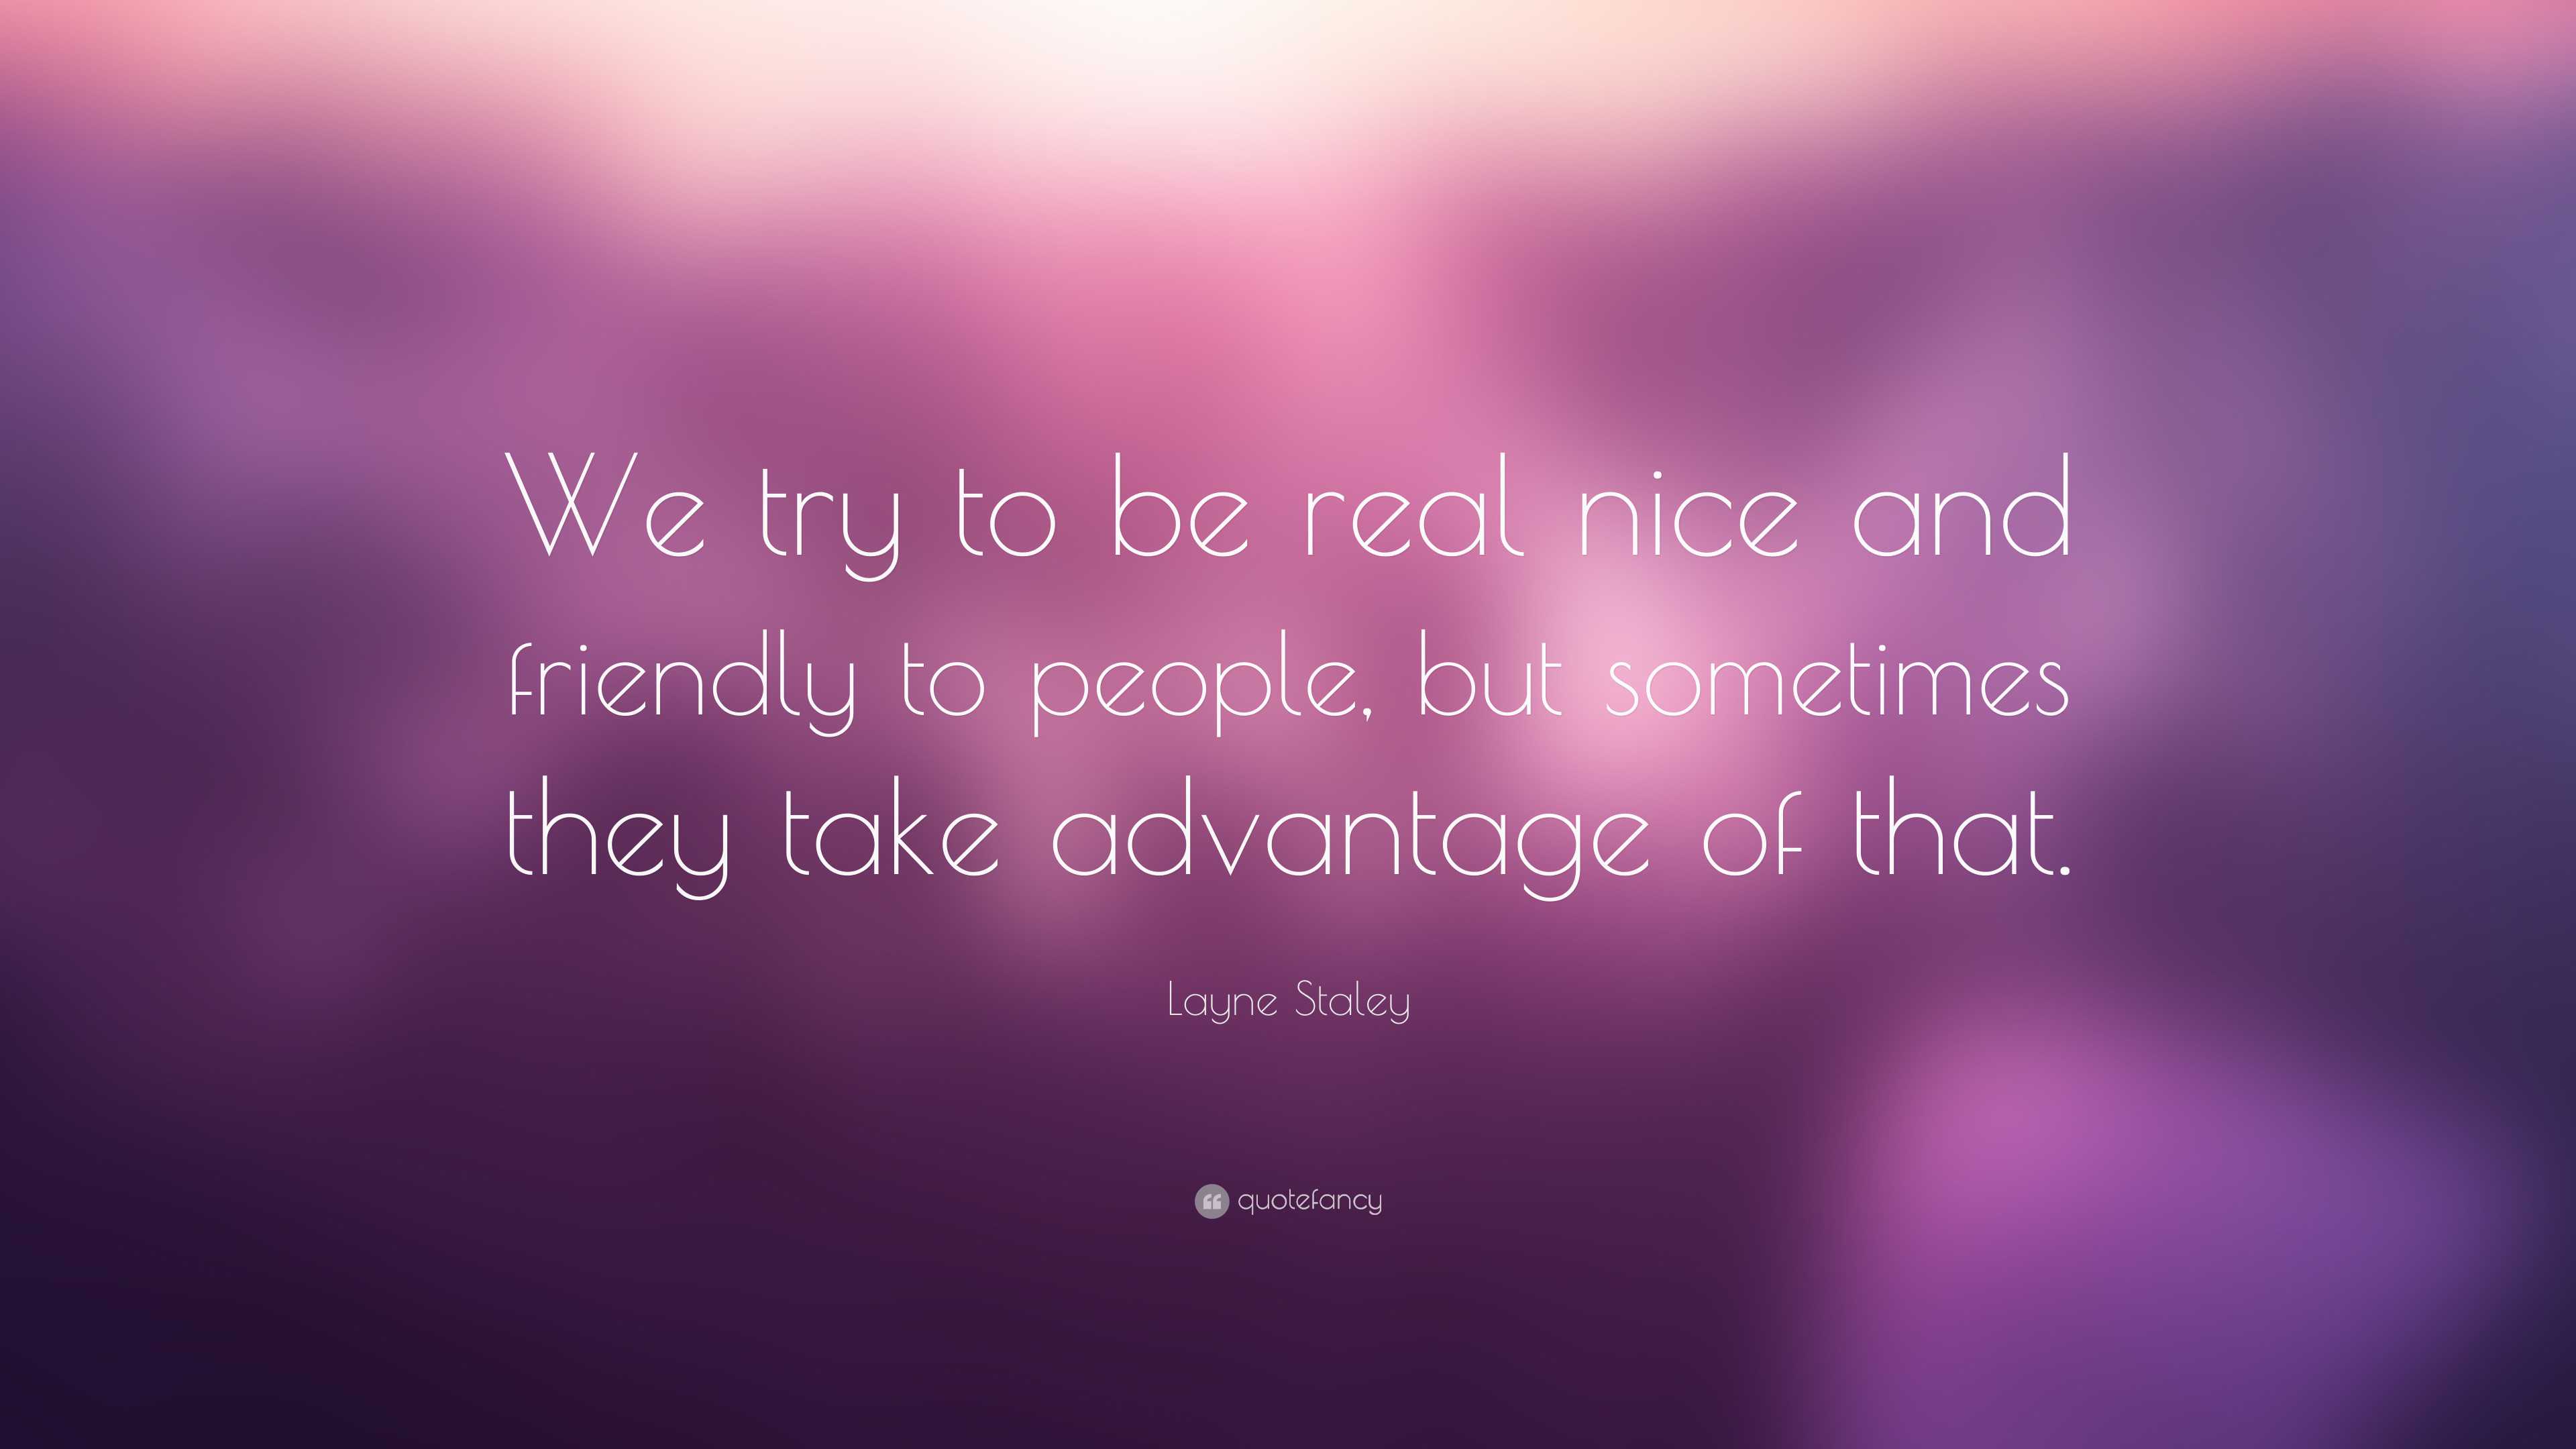 3840x2160 Layne Staley Quote: “We try to be real nice and friendly to people,